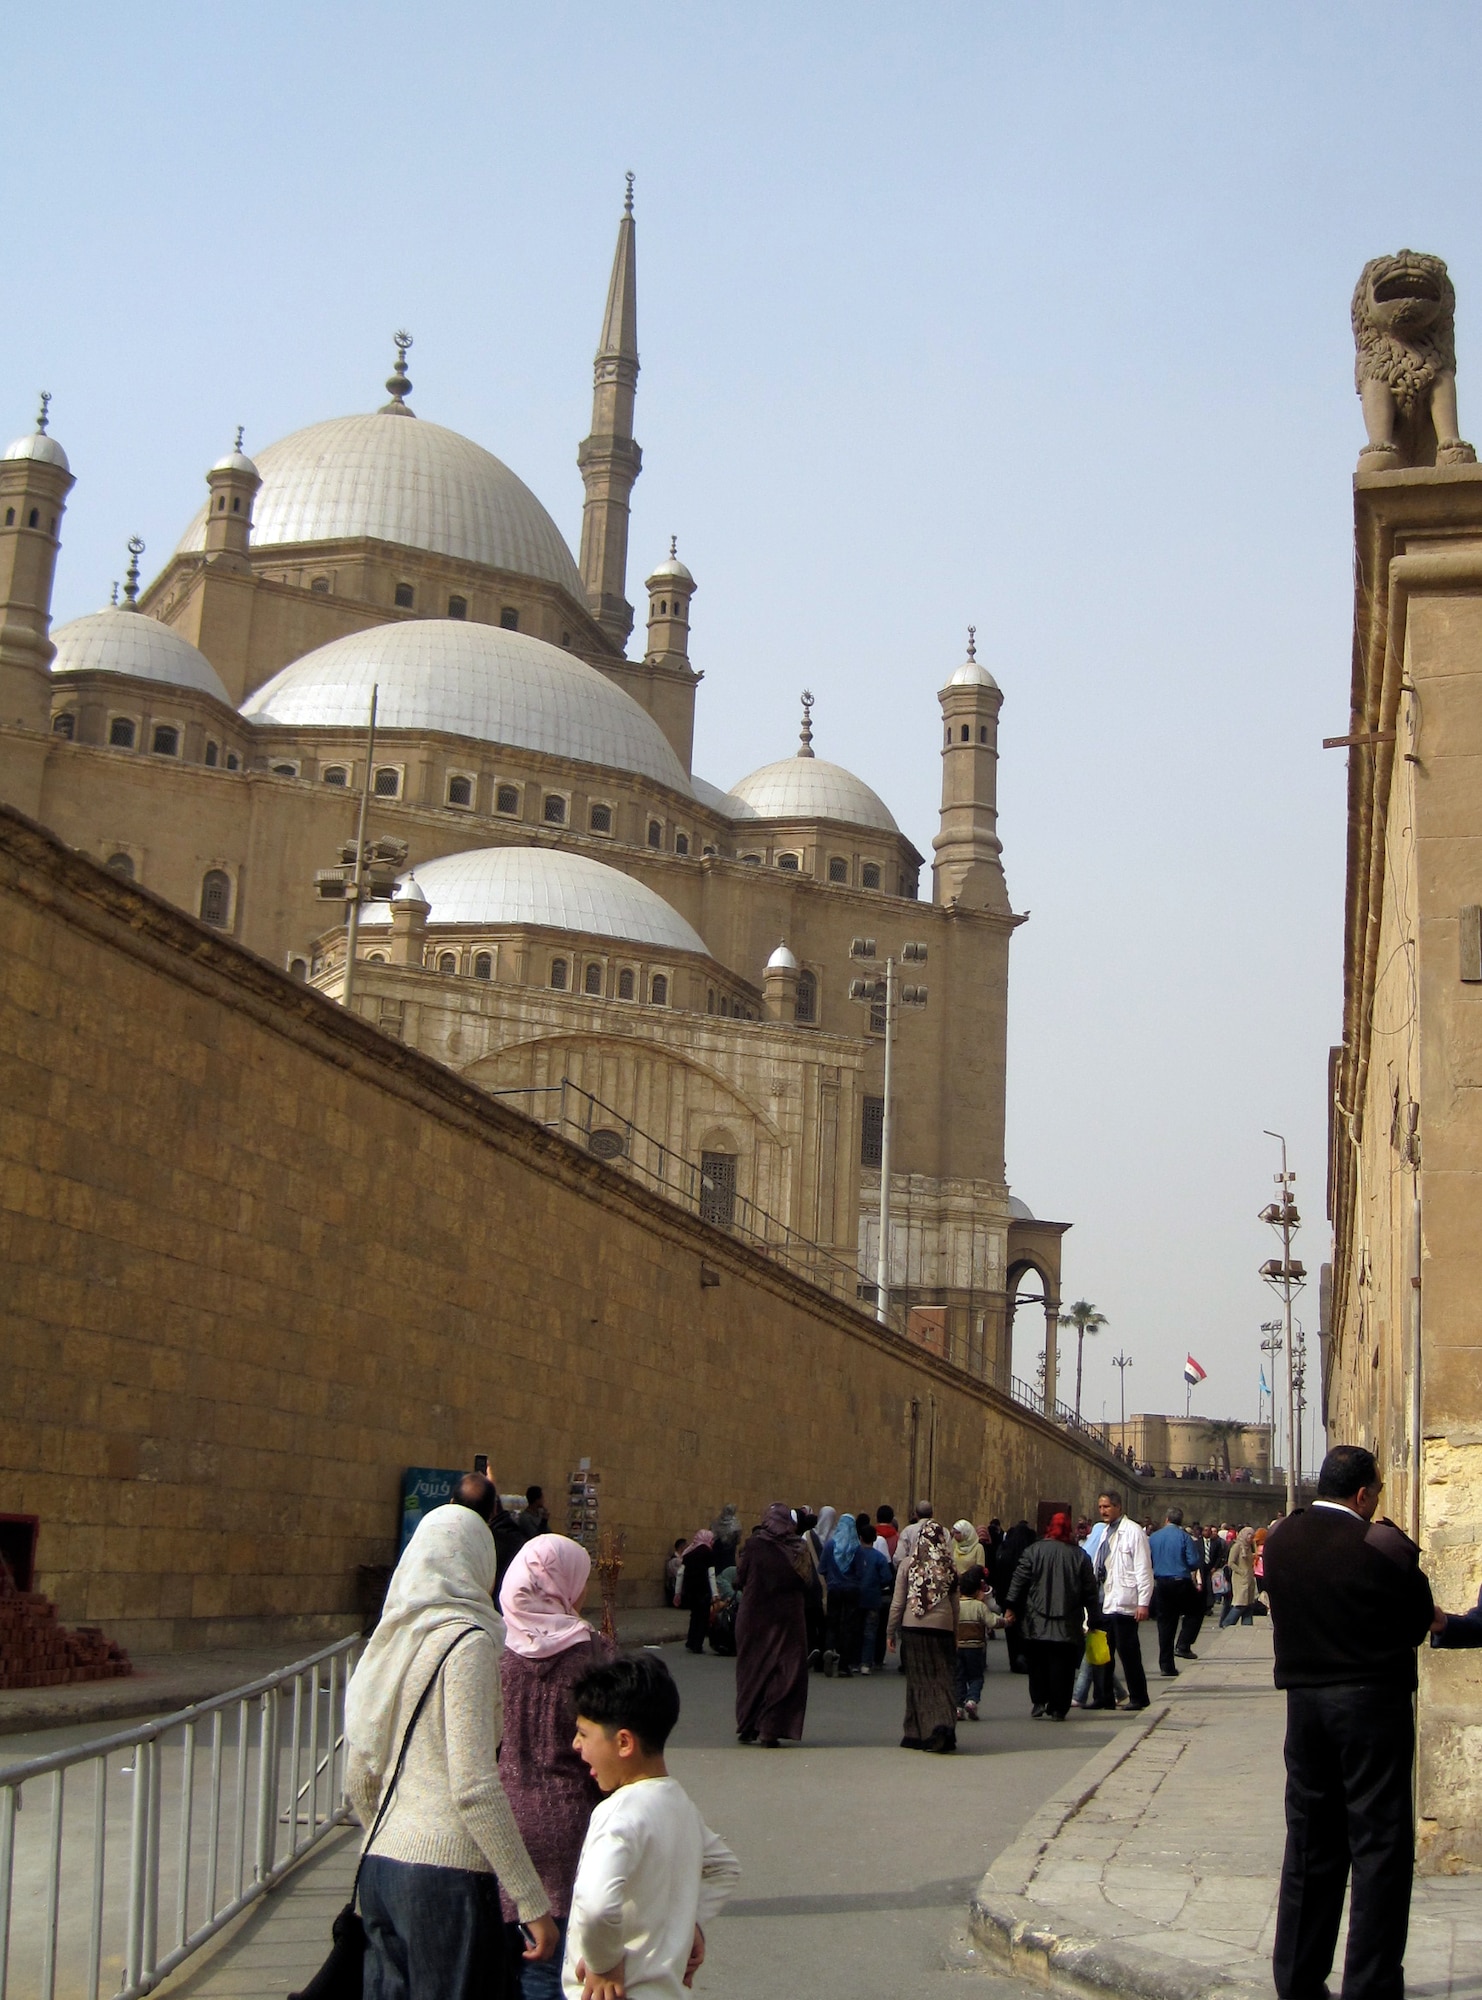 The Mosque of Muhammad Ali, regarded as the founder of modern Egypt, is visible from the outside walls of the Citadel of Cairo, Egypt. The Mosque of Muhammad Ali is located inside the Citadel of Cairo Egypt. The famous citadel was built between 1176 and 1183 A.D. to protect people and the territory from the Crusaders. The Mosque was built in 1830 and 1848 in memory of Tusun Pasha, Muhammad Ali’s oldest son. The Citadel is a popular tourist spot because of its great history, fantastic architecture and view of the city. (U.S. Air Force photo/Senior Airman Sara Csurilla)